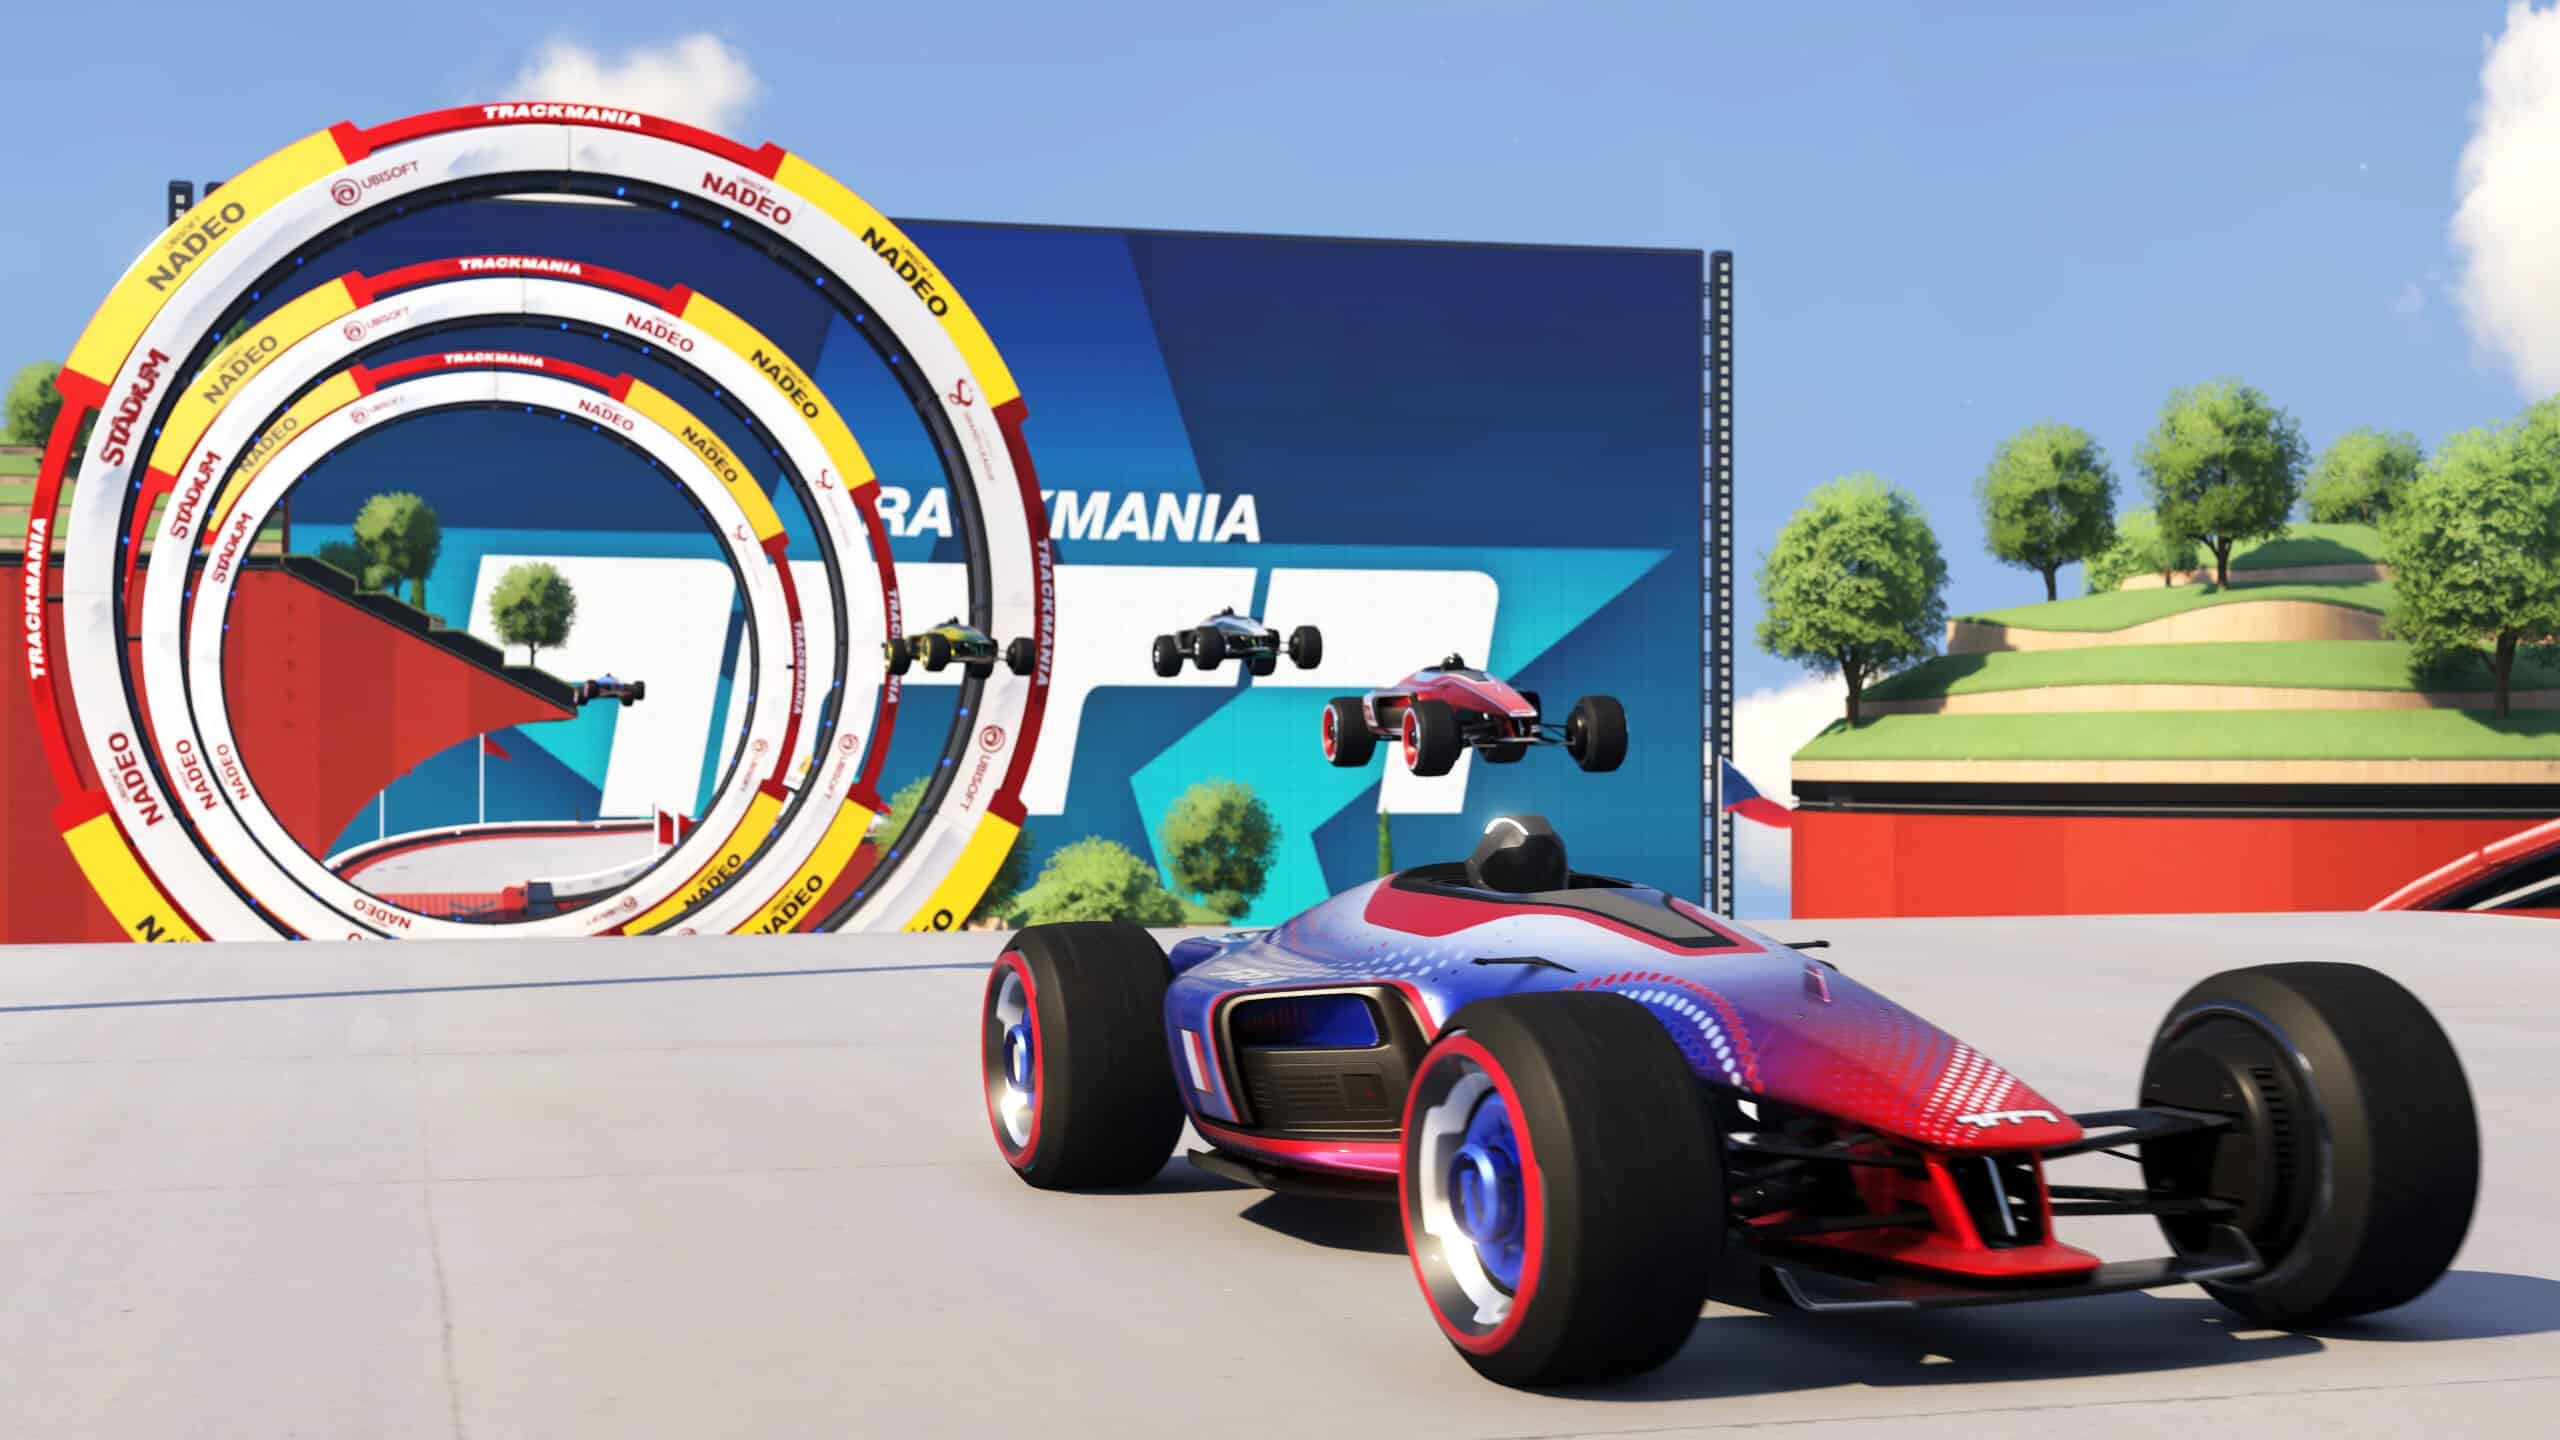 Trackmania Spring 2022 campaign brings new UI, new track blocks